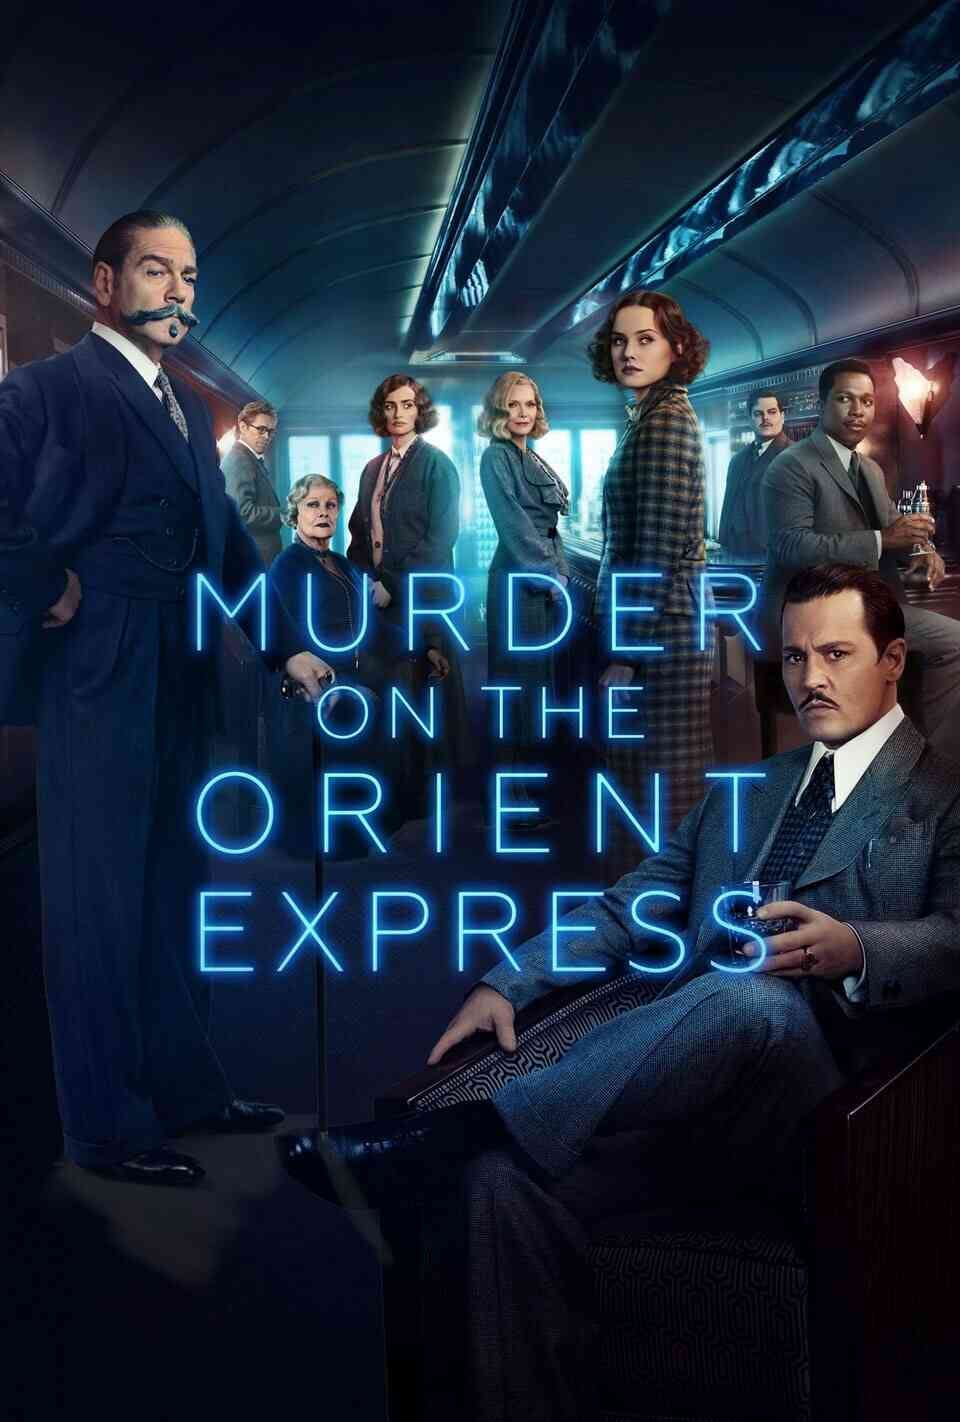 Read Murder on the Orient Express screenplay.